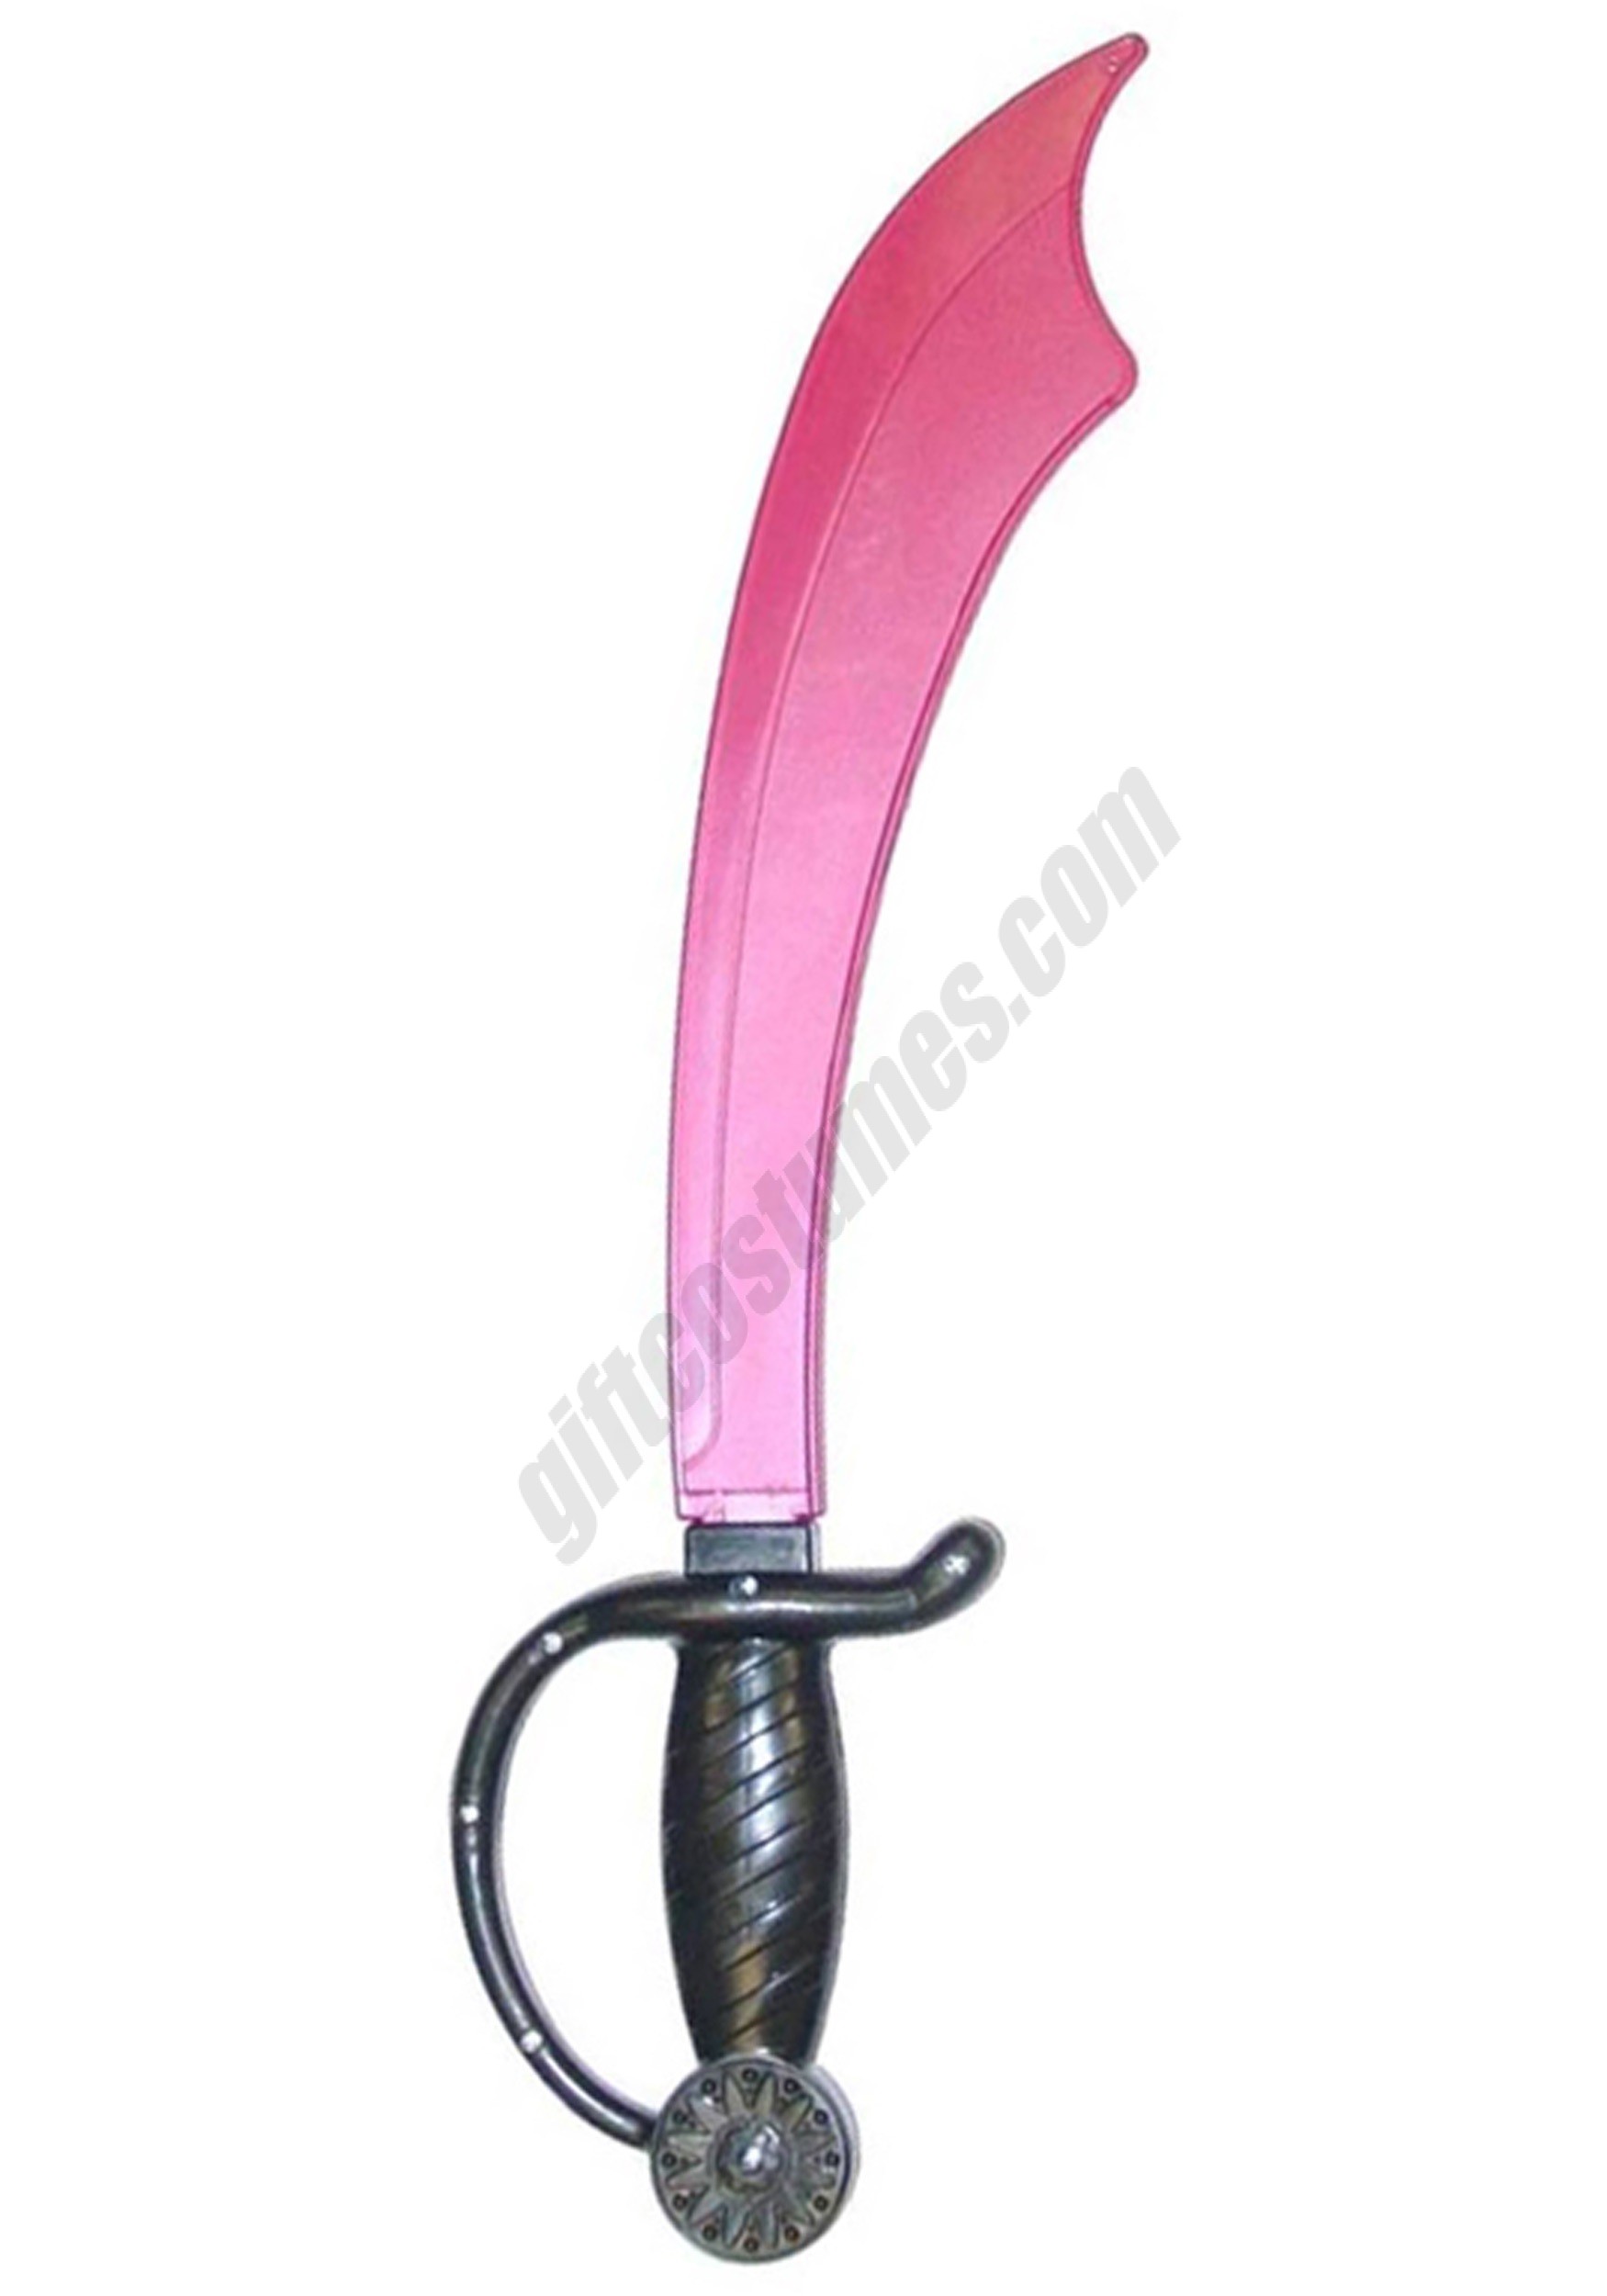 Pink Toy Pirate Sword Promotions - Pink Toy Pirate Sword Promotions